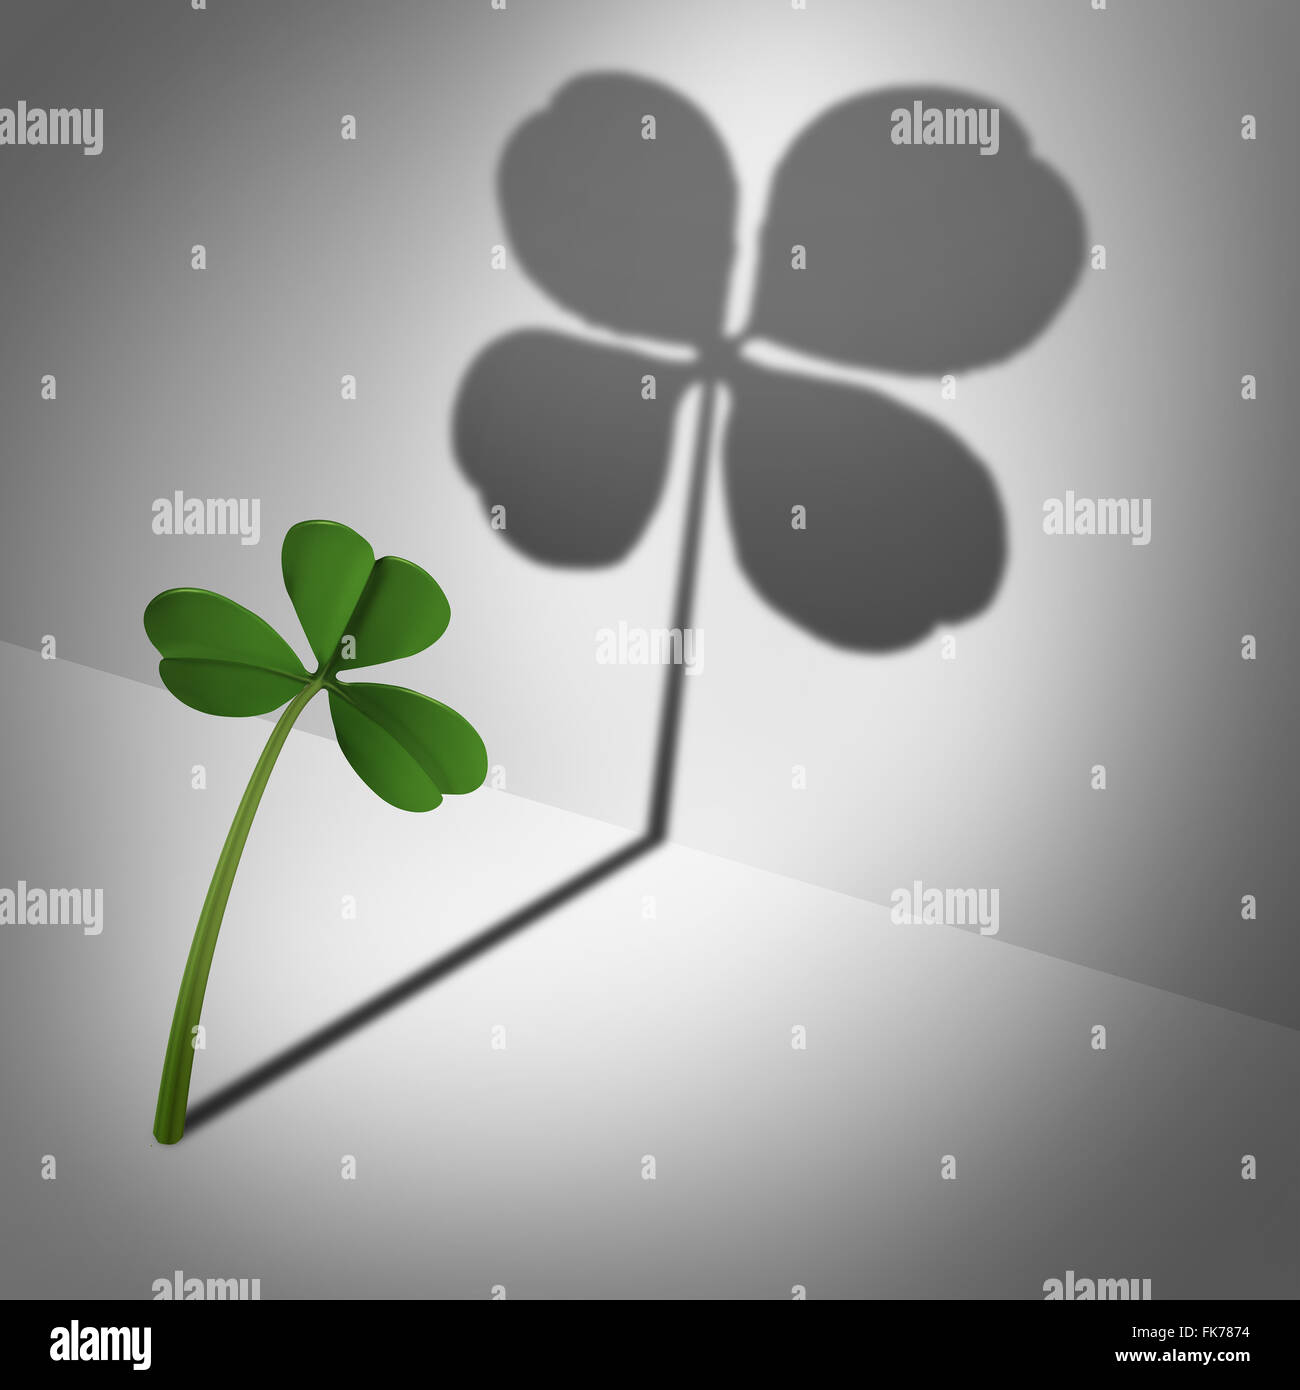 Think positive as an optimistic motvational concept and feeling lucky and positive thinking and inner confidence icon as a three leaf clover casting a shadow with four leaves as a metaphor for optimism and believing in success. Stock Photo